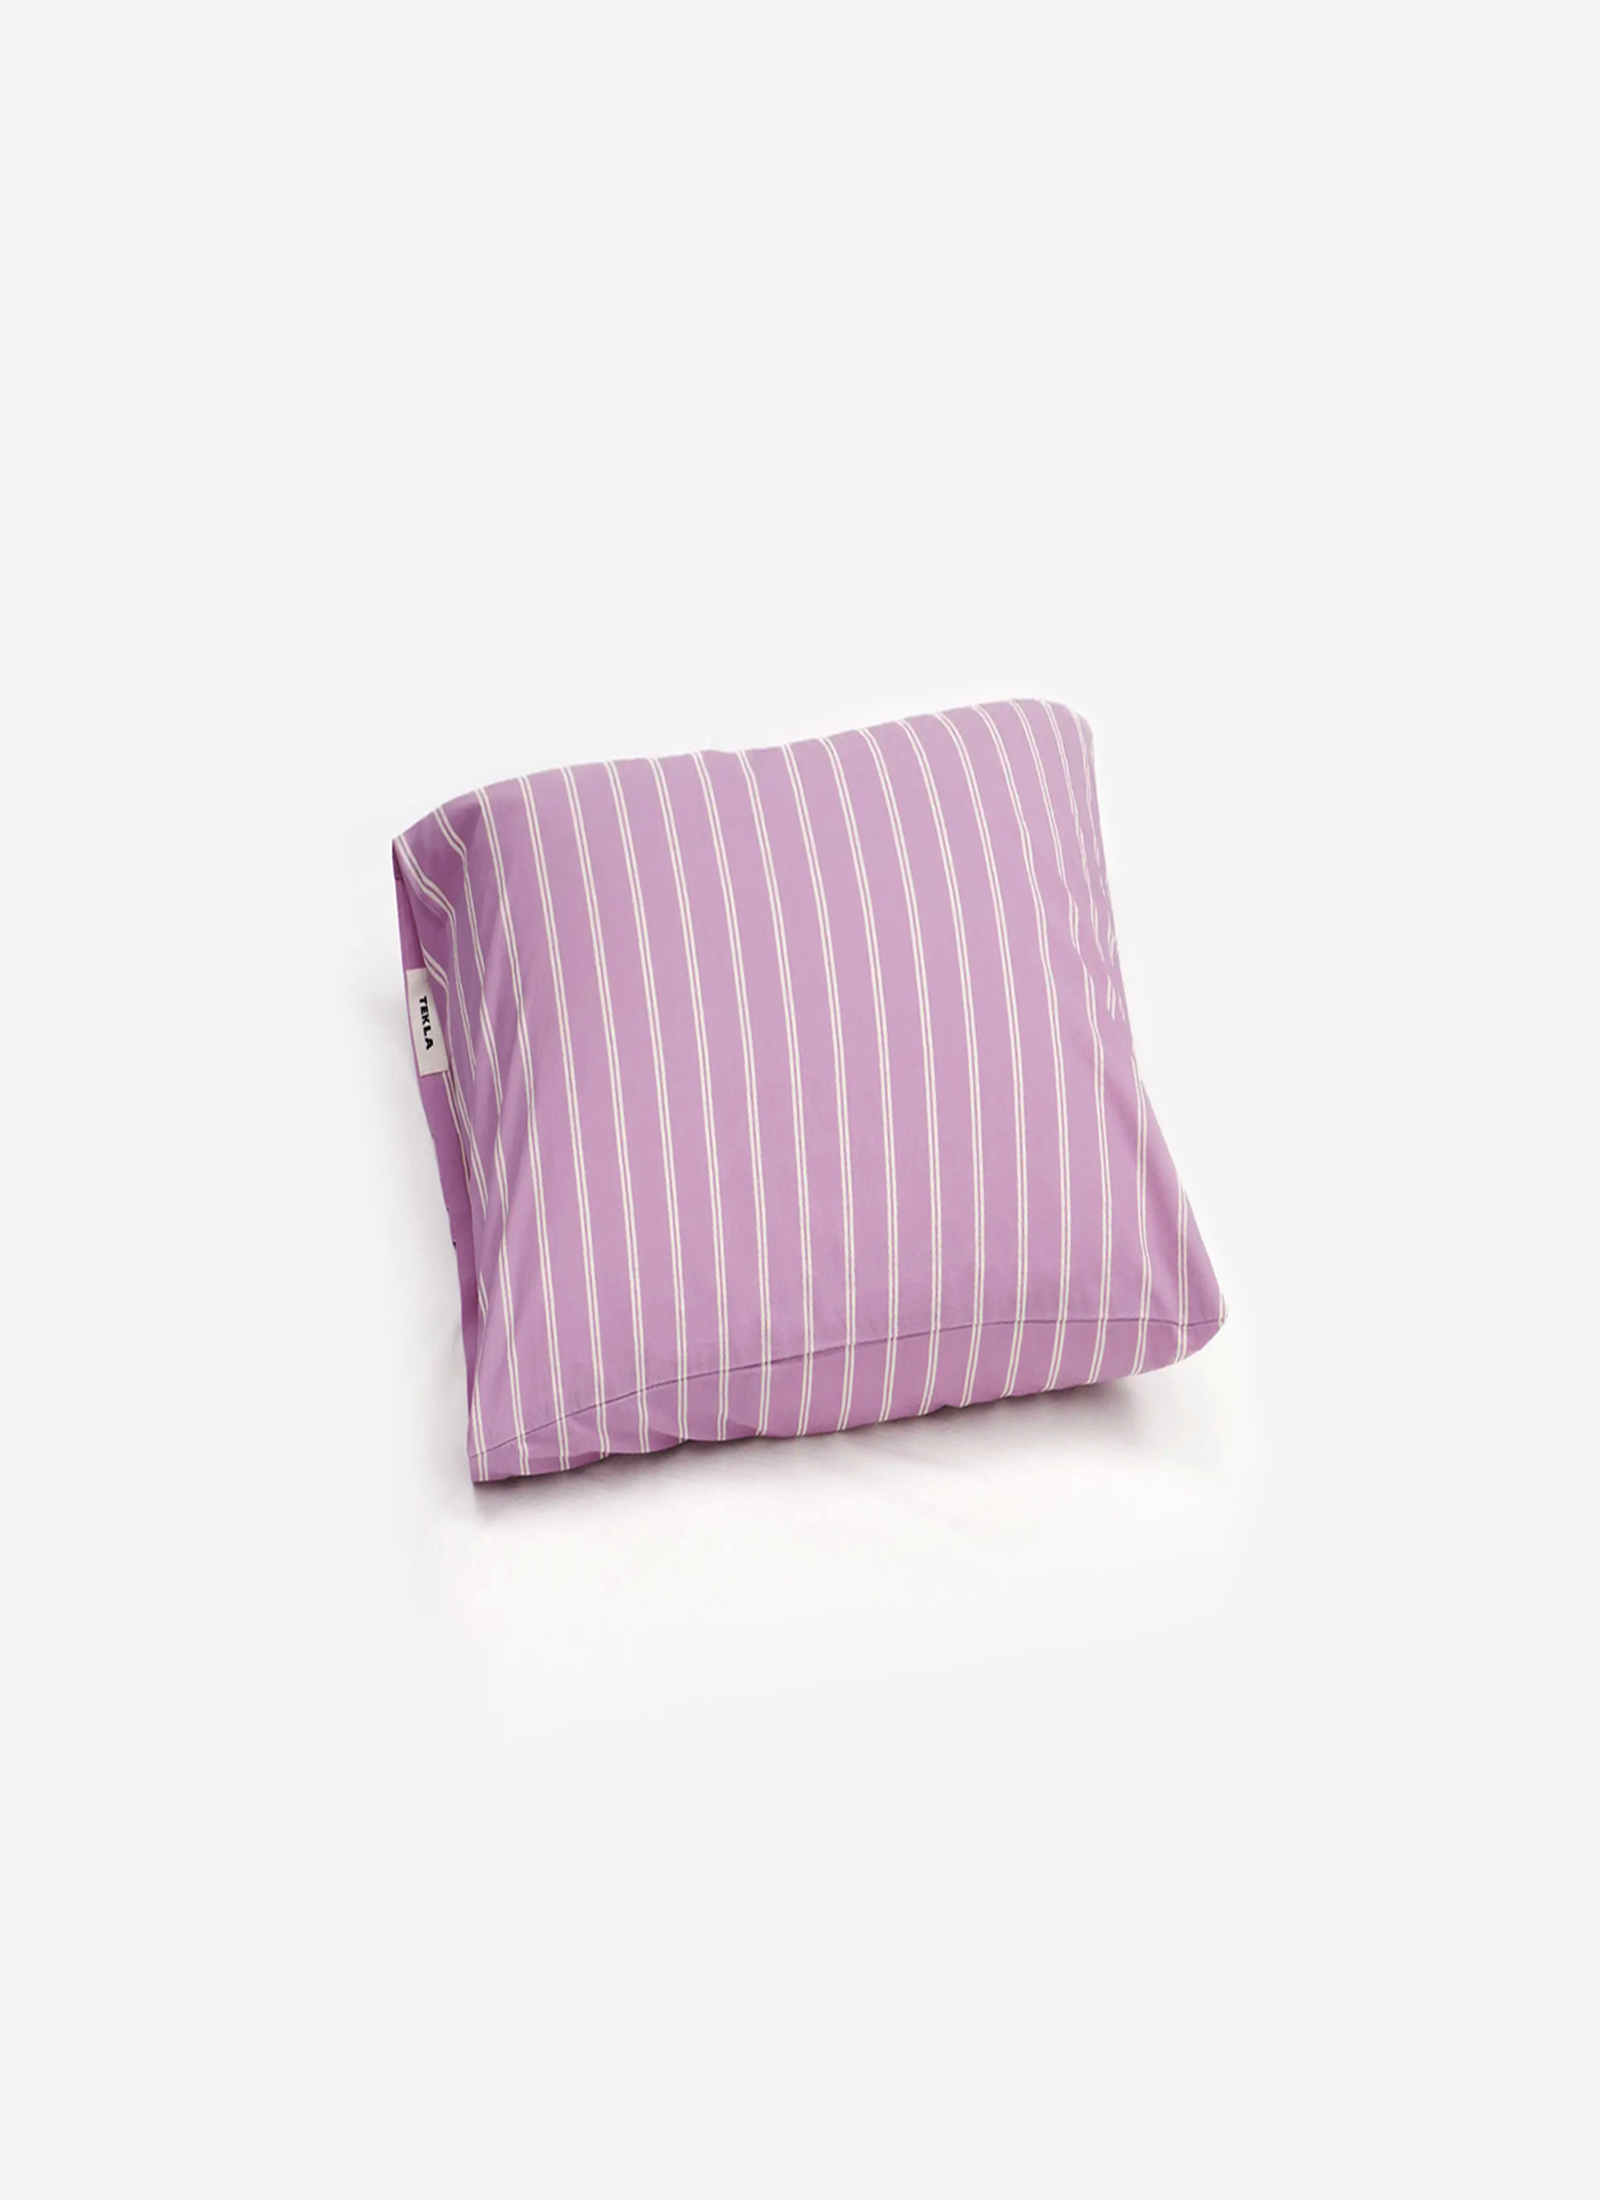 Pillowcases in Mallow Pink Stripes - Pair